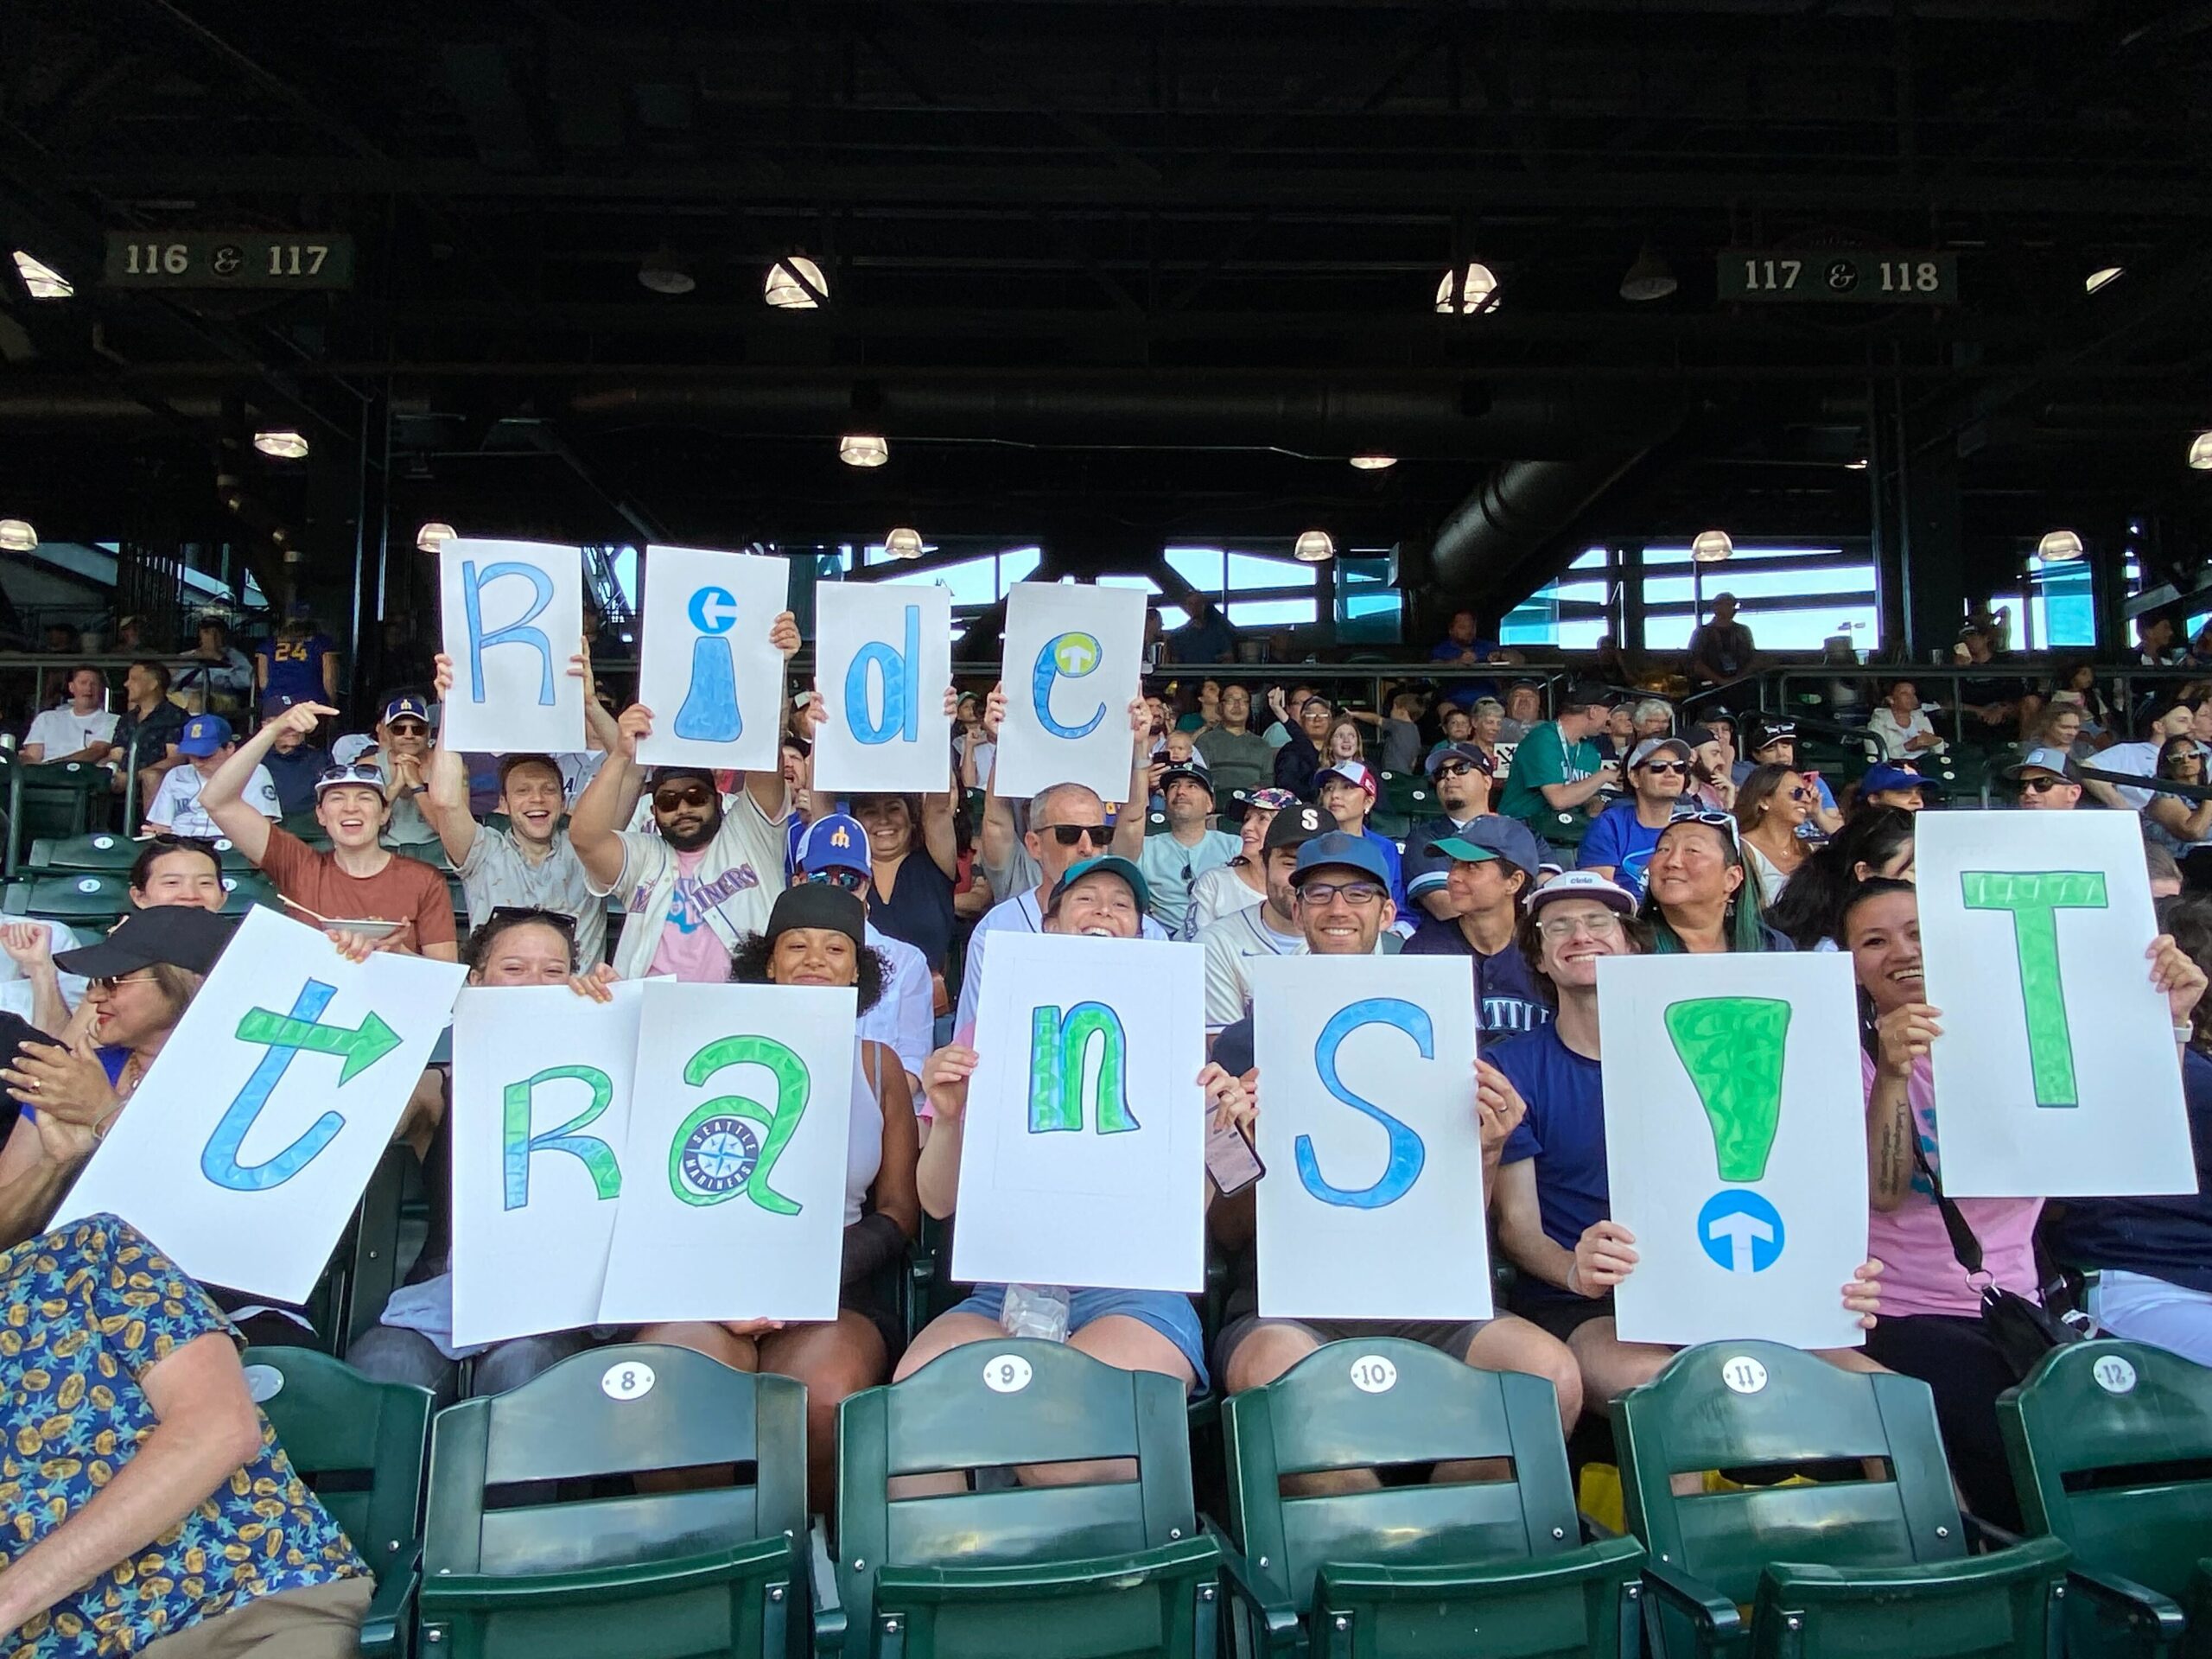 Fans at a Mariners Game holding up signs that read "Ride Transit!"